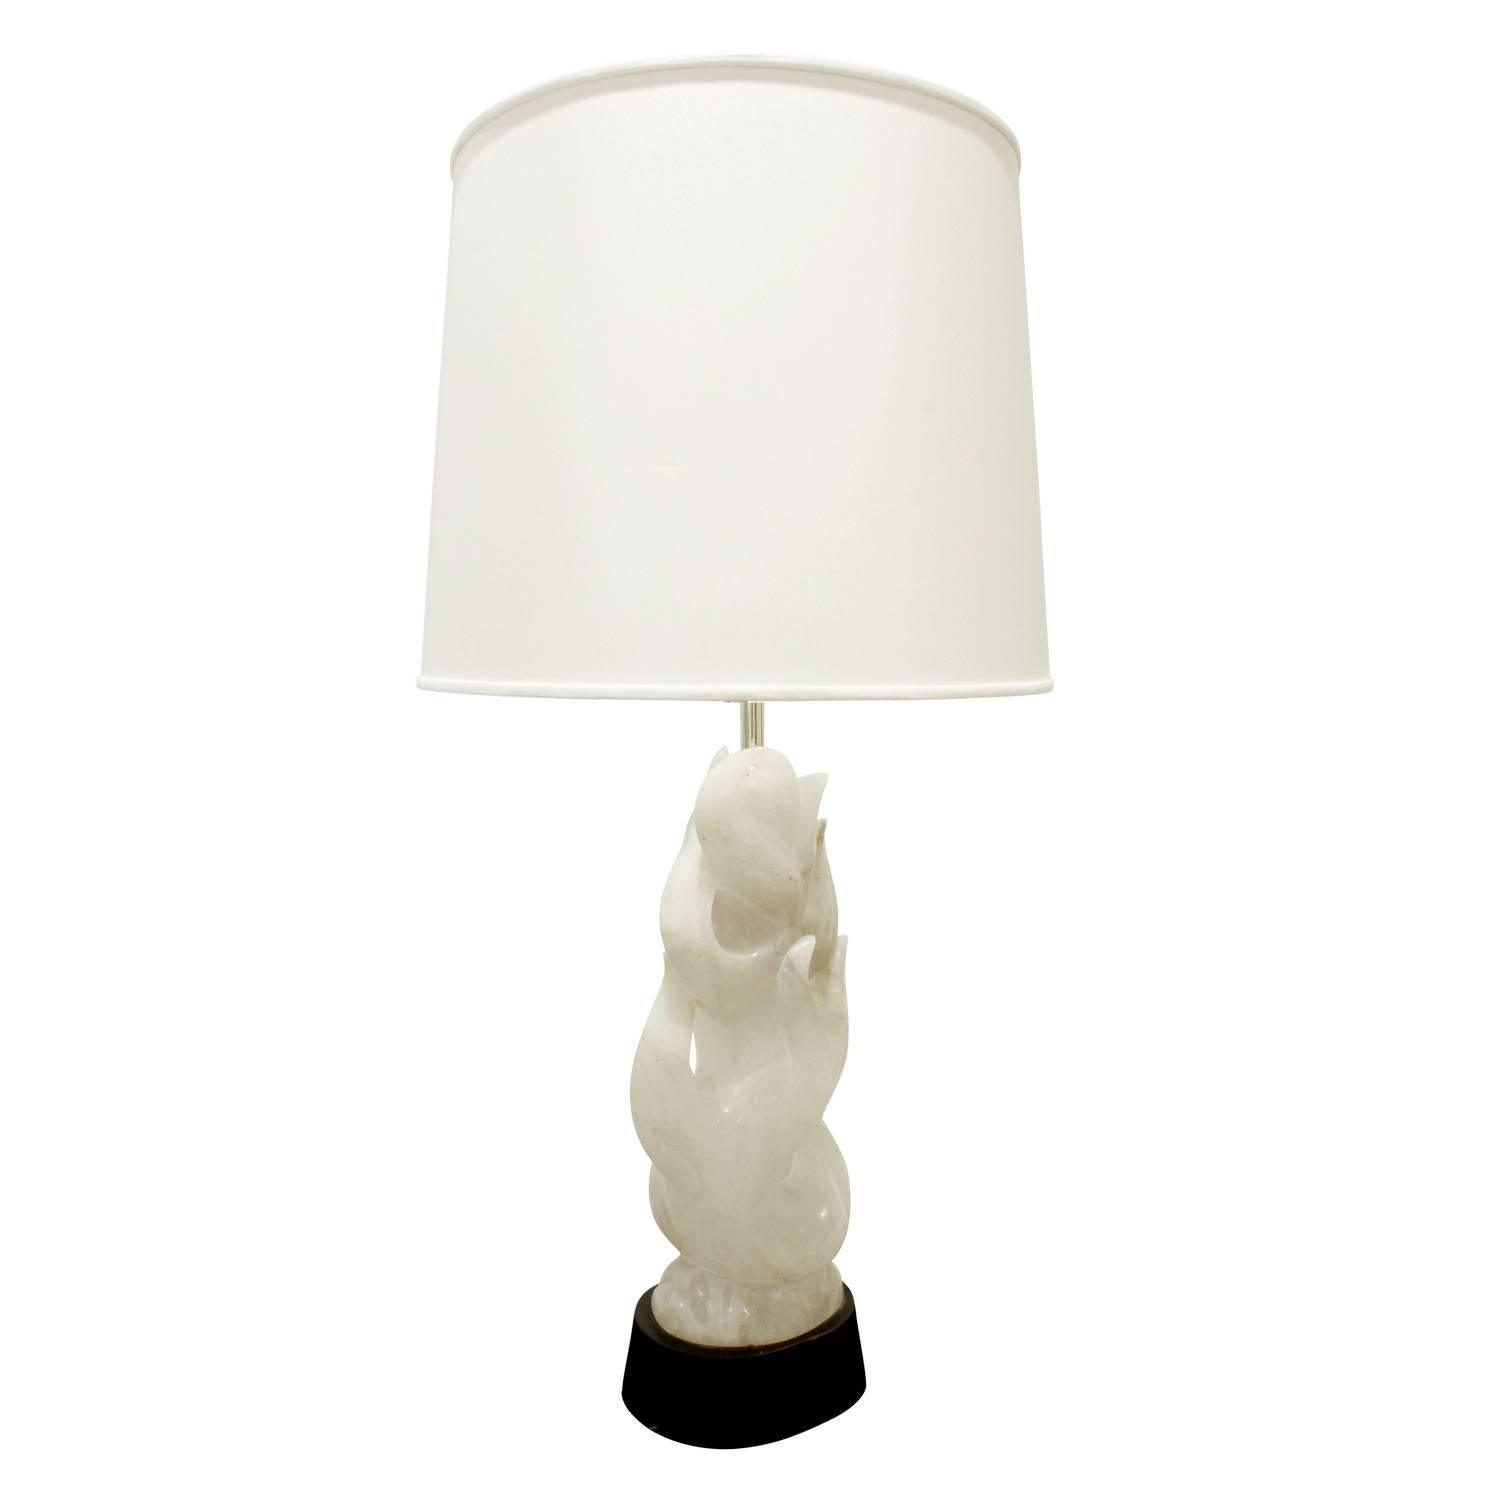 Hand-carved alabaster table lamp with flame motif on an ebonized base, Italian, 1940s. Newly wired with new socket.